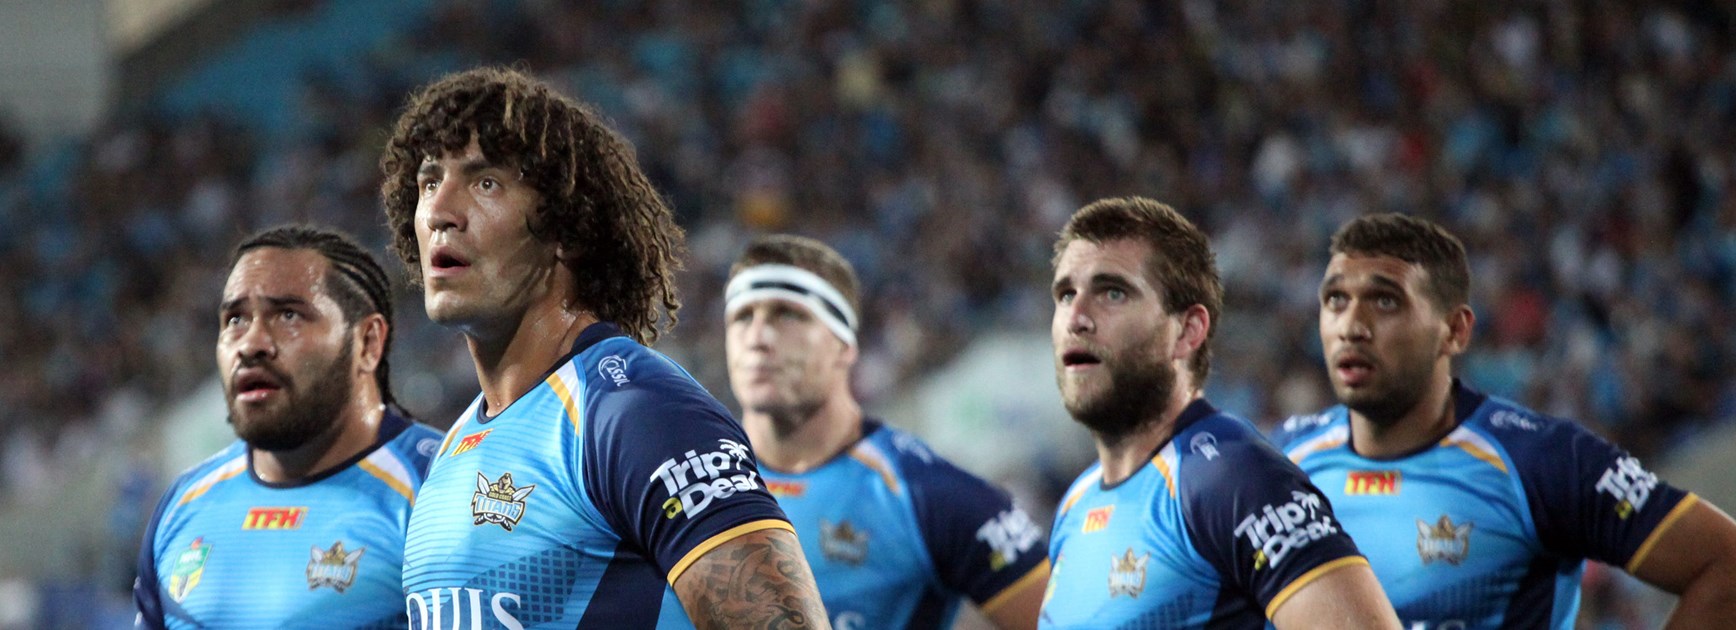 The Stat to Fix: The Titans in the opposition's firing line